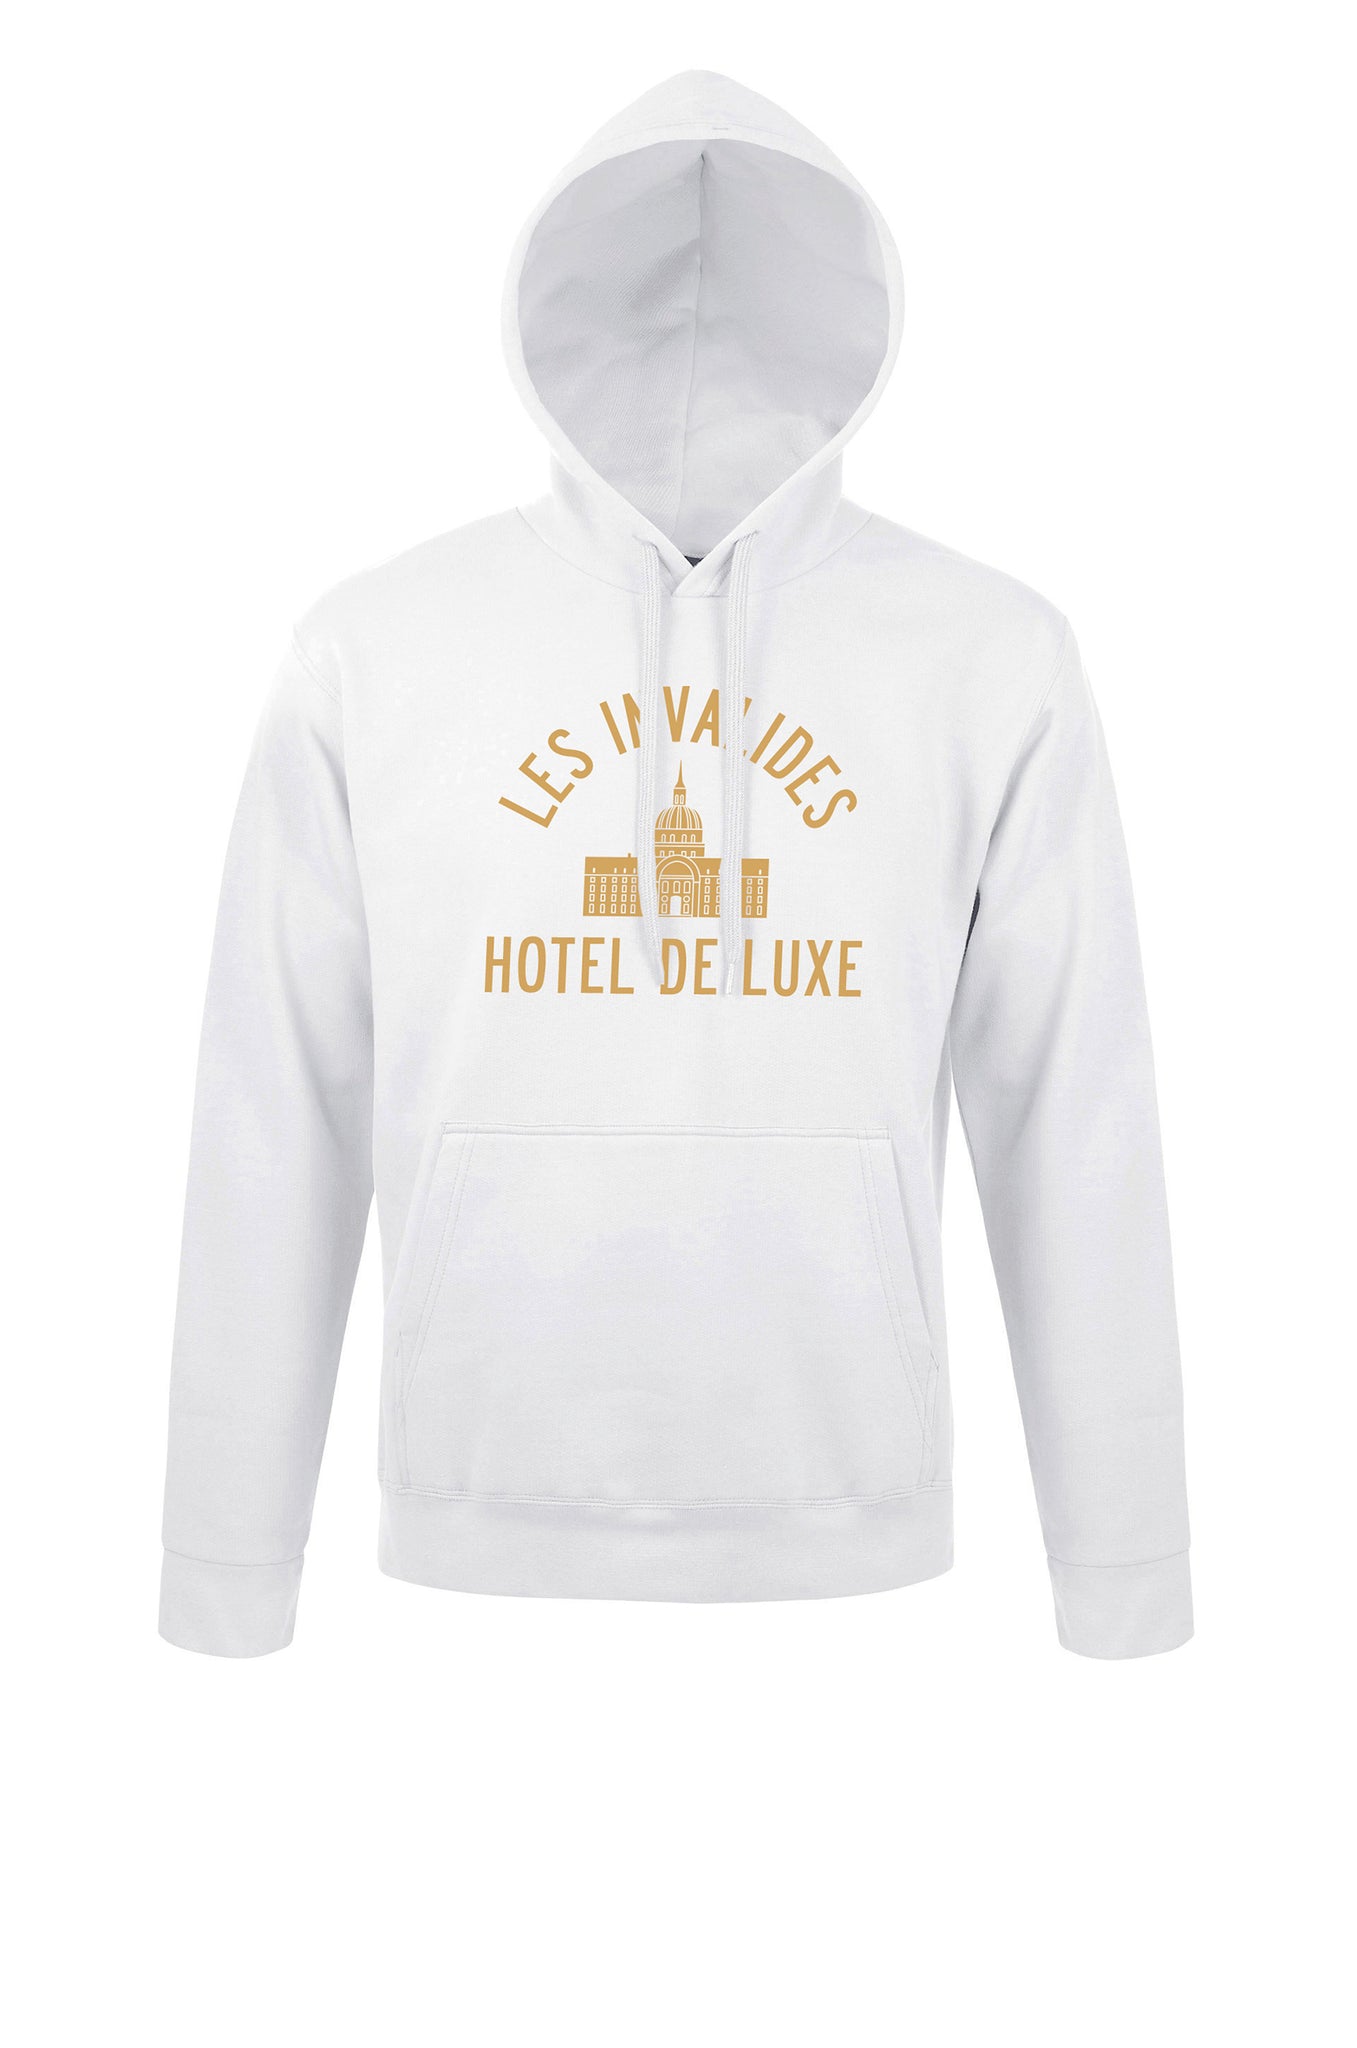 Les Invalides - Hoodie Deluxe-Sweat shirts-Atelier Amelot